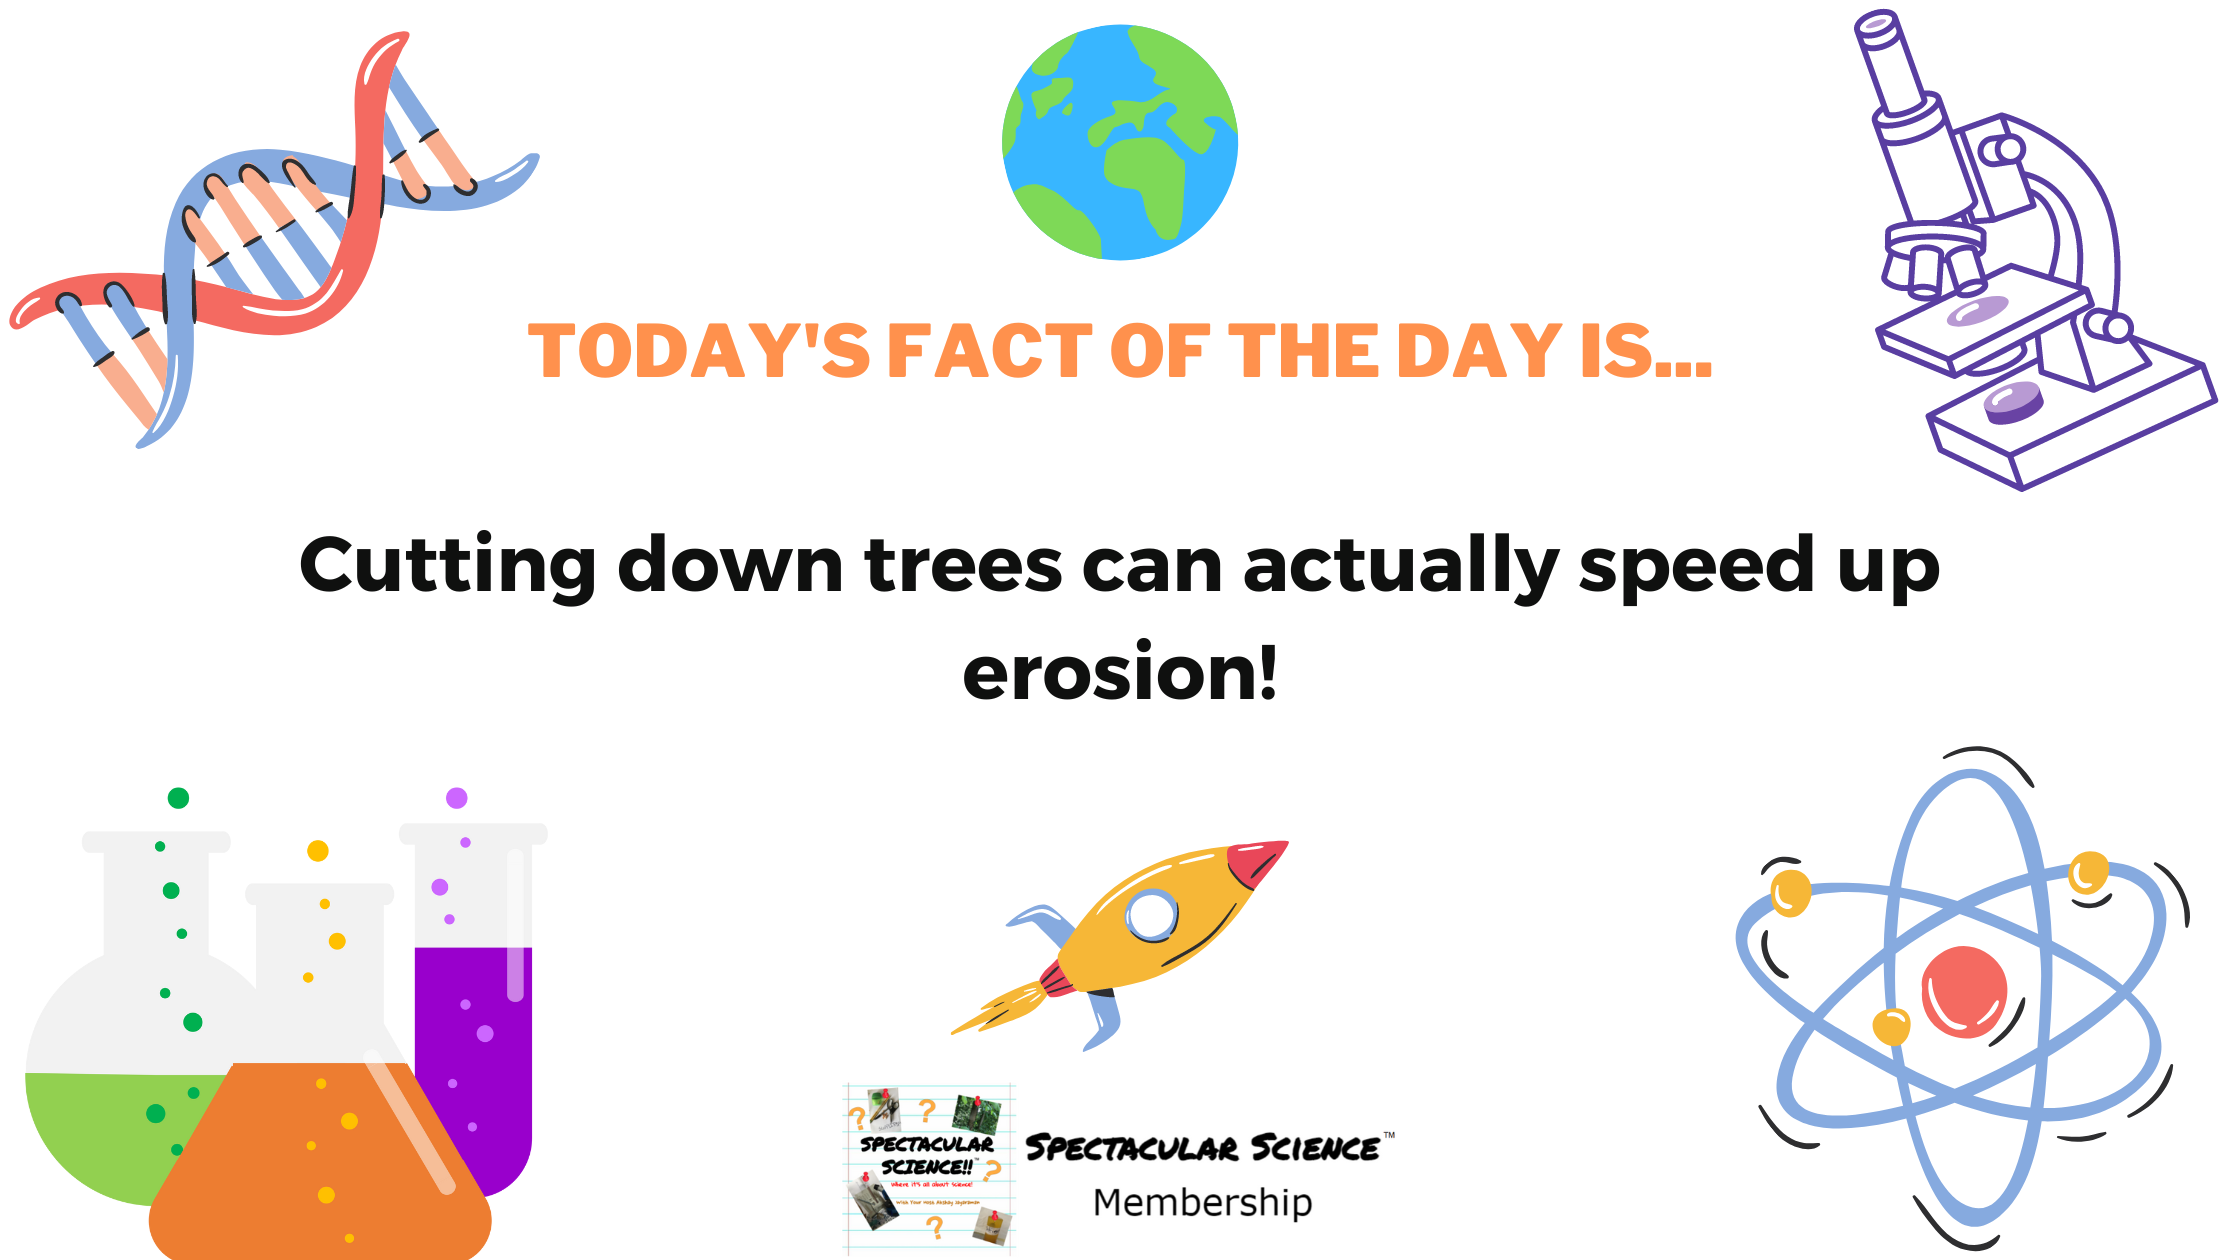 Fact of the Day Image July 11th